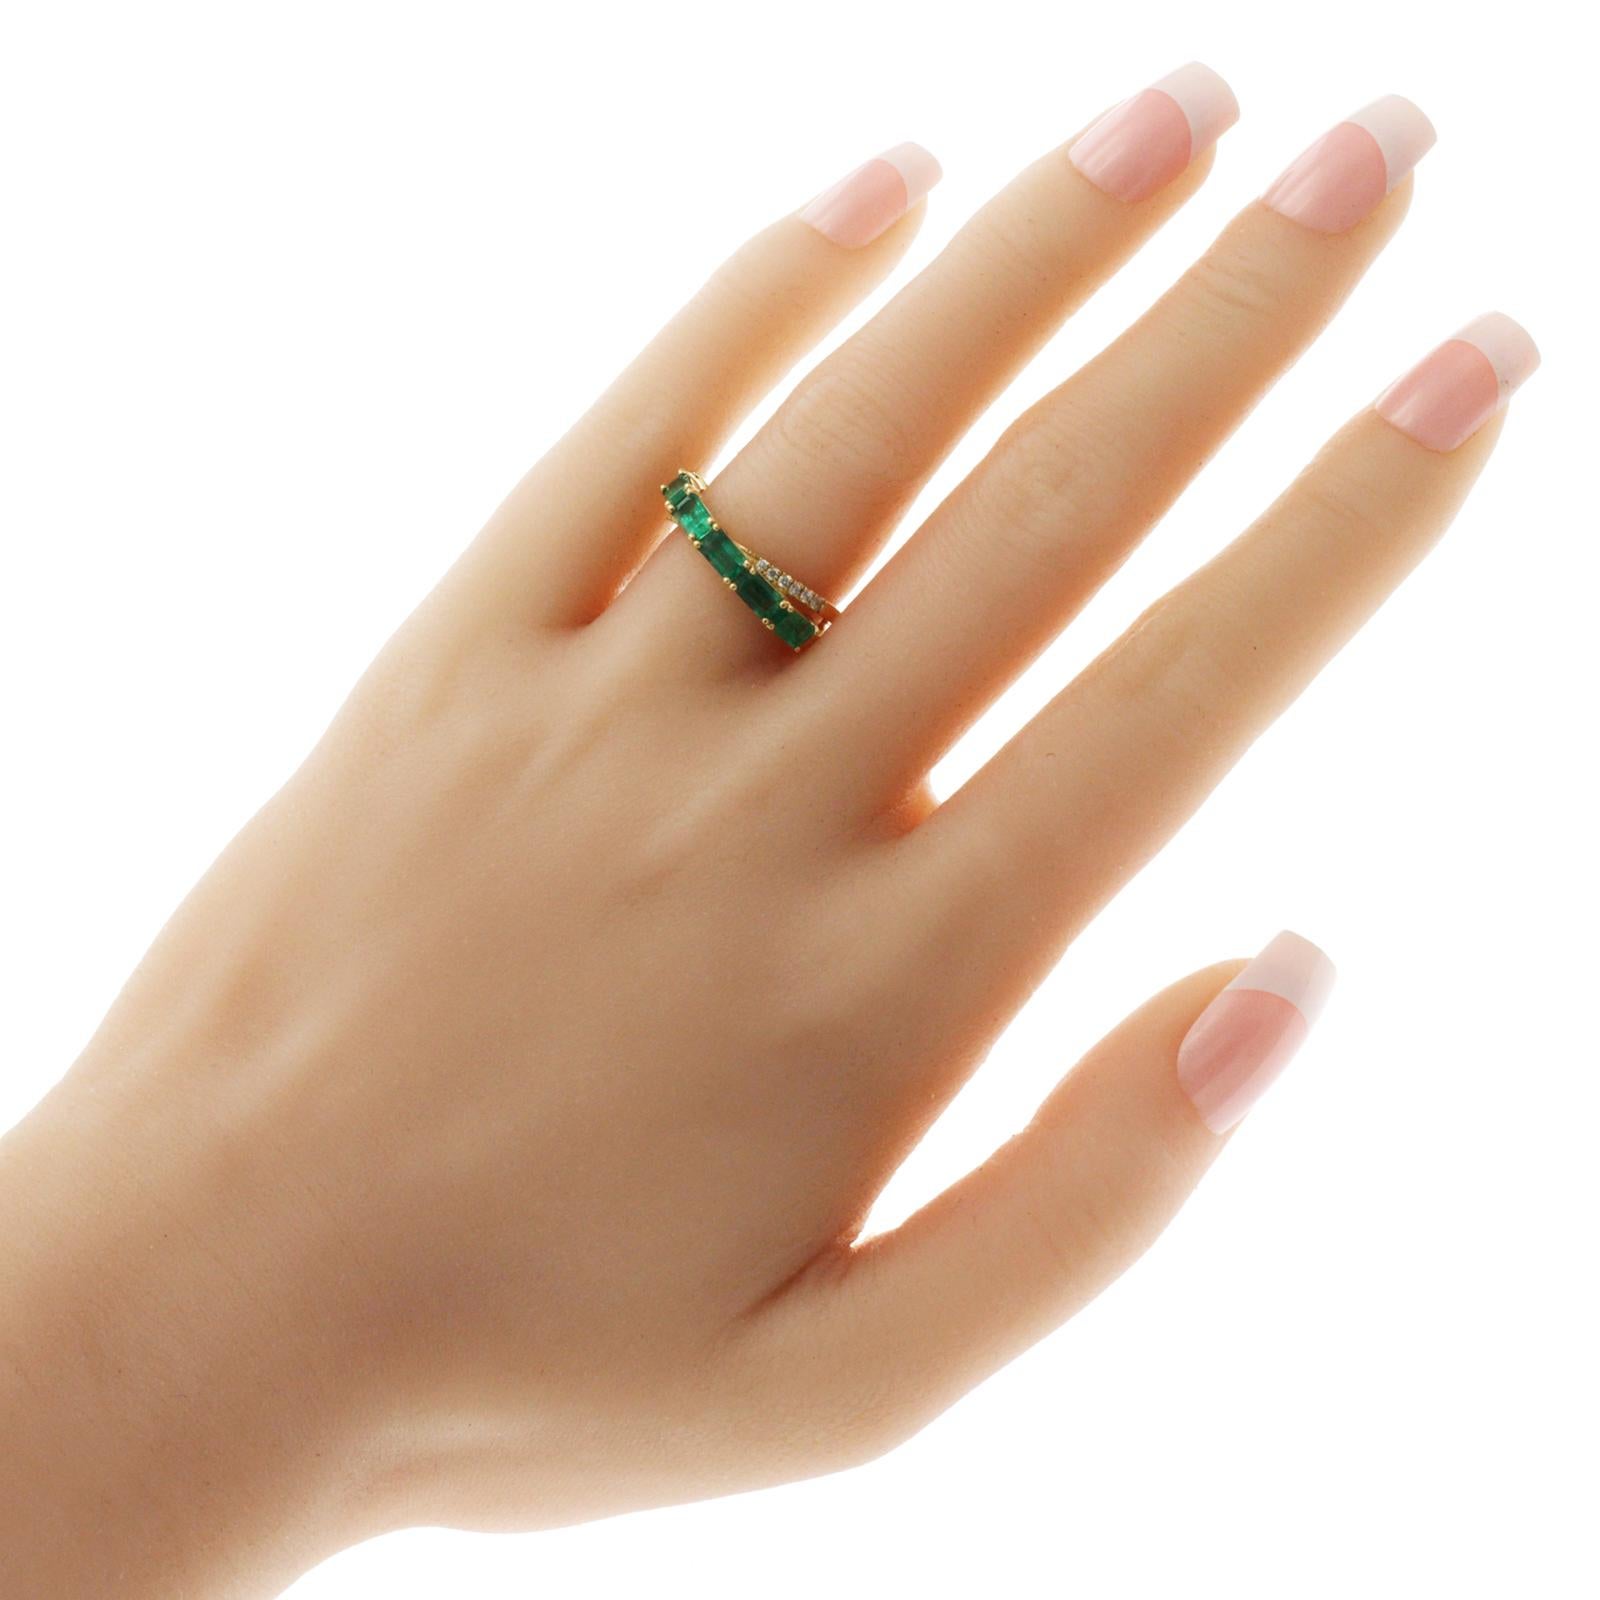 100% Authentic, 100% Customer Satisfaction

Top: 3.5 mm

Band Width:  2 mm

Metal: 14K Yellow Gold 

Size: 6-8 ( Please message Us for your Size )

Hallmarks: 14K

Total Weight: 3.6 Grams

Stone Type:  1.76 CT Natural Emerald & 0.12 G SI-VS2 CT